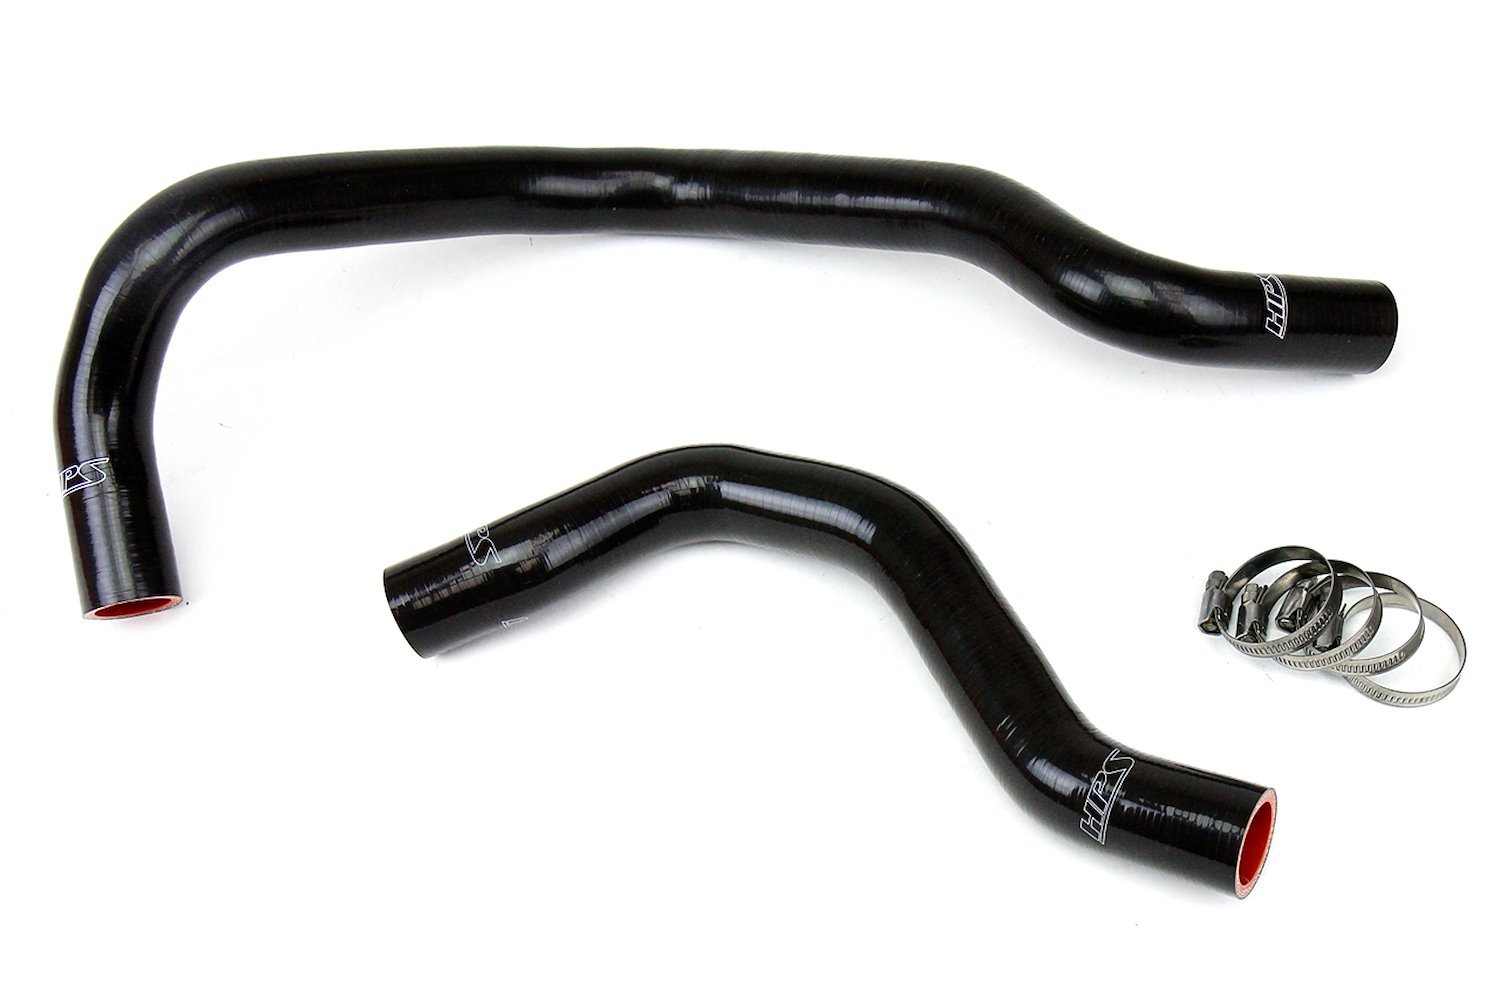 57-1016-BLK Radiator Hose Kit, High-Temp 3-Ply Reinforced Silicone, Replace OEM Rubber Radiator Coolant Hoses